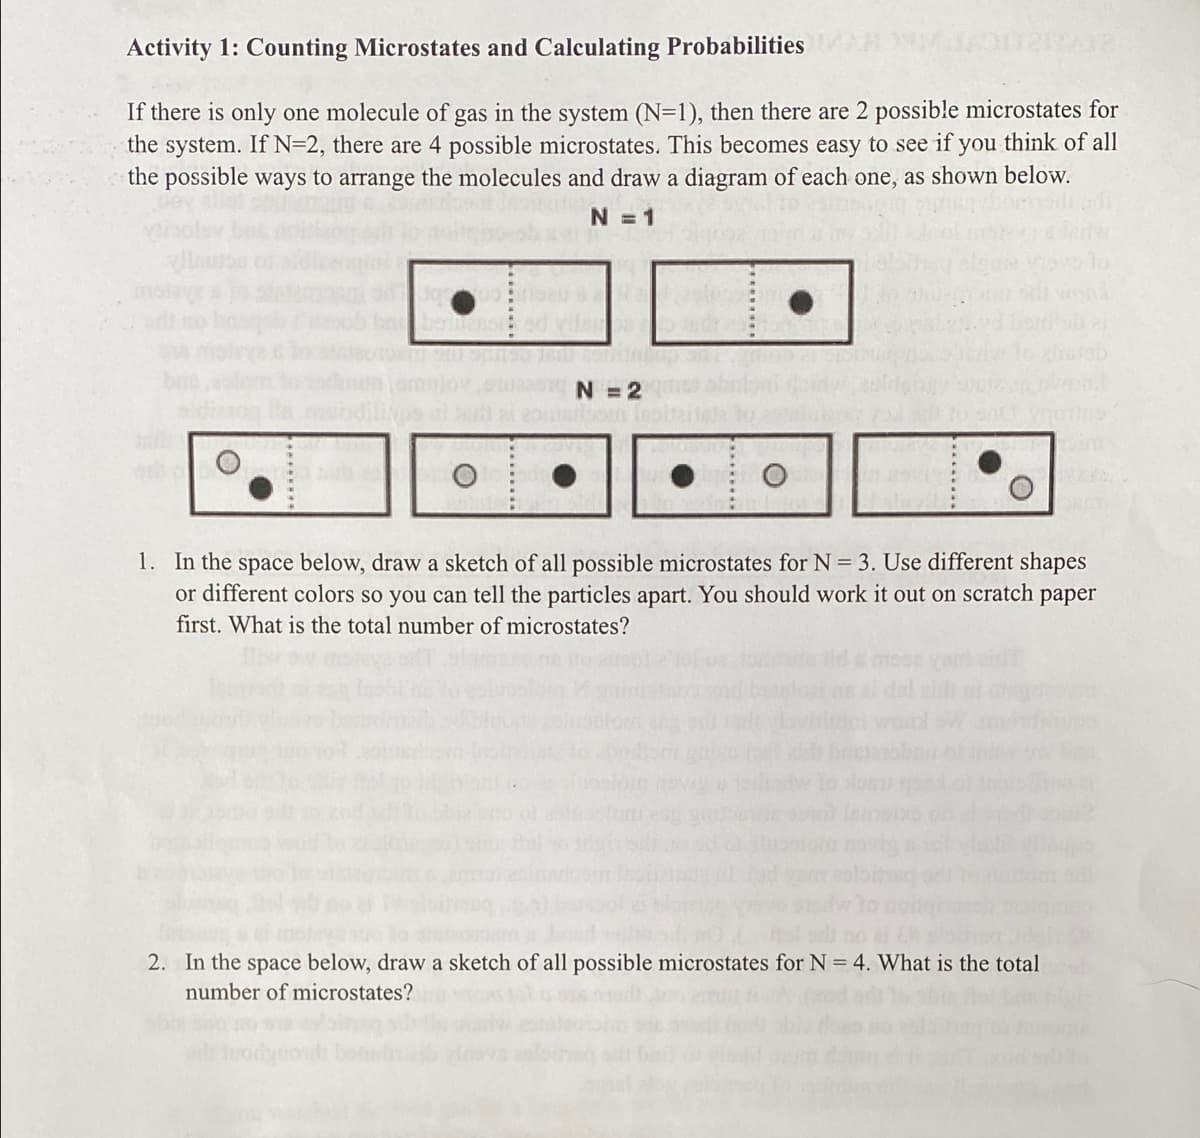 Activity 1: Counting Microstates and Calculating Probabilities
If there is only one molecule of gas in the system (N=1), then there are 2 possible microstates for
the system. If N=2, there are 4 possible microstates. This becomes easy to see if you think of all
the possible ways to arrange the molecules and draw a diagram of each one, as shown below.
N =1
moleye
N = 2
1. In the space below, draw a sketch of all possible microstates for N = 3. Use different shapes
or different colors so you can tell the particles apart. You should work it out on scratch paper
first. What is the total number of microstates?
2. In the space below, draw a sketch of all possible microstates for N = 4. What is the total
number of microstates?
uodyot
